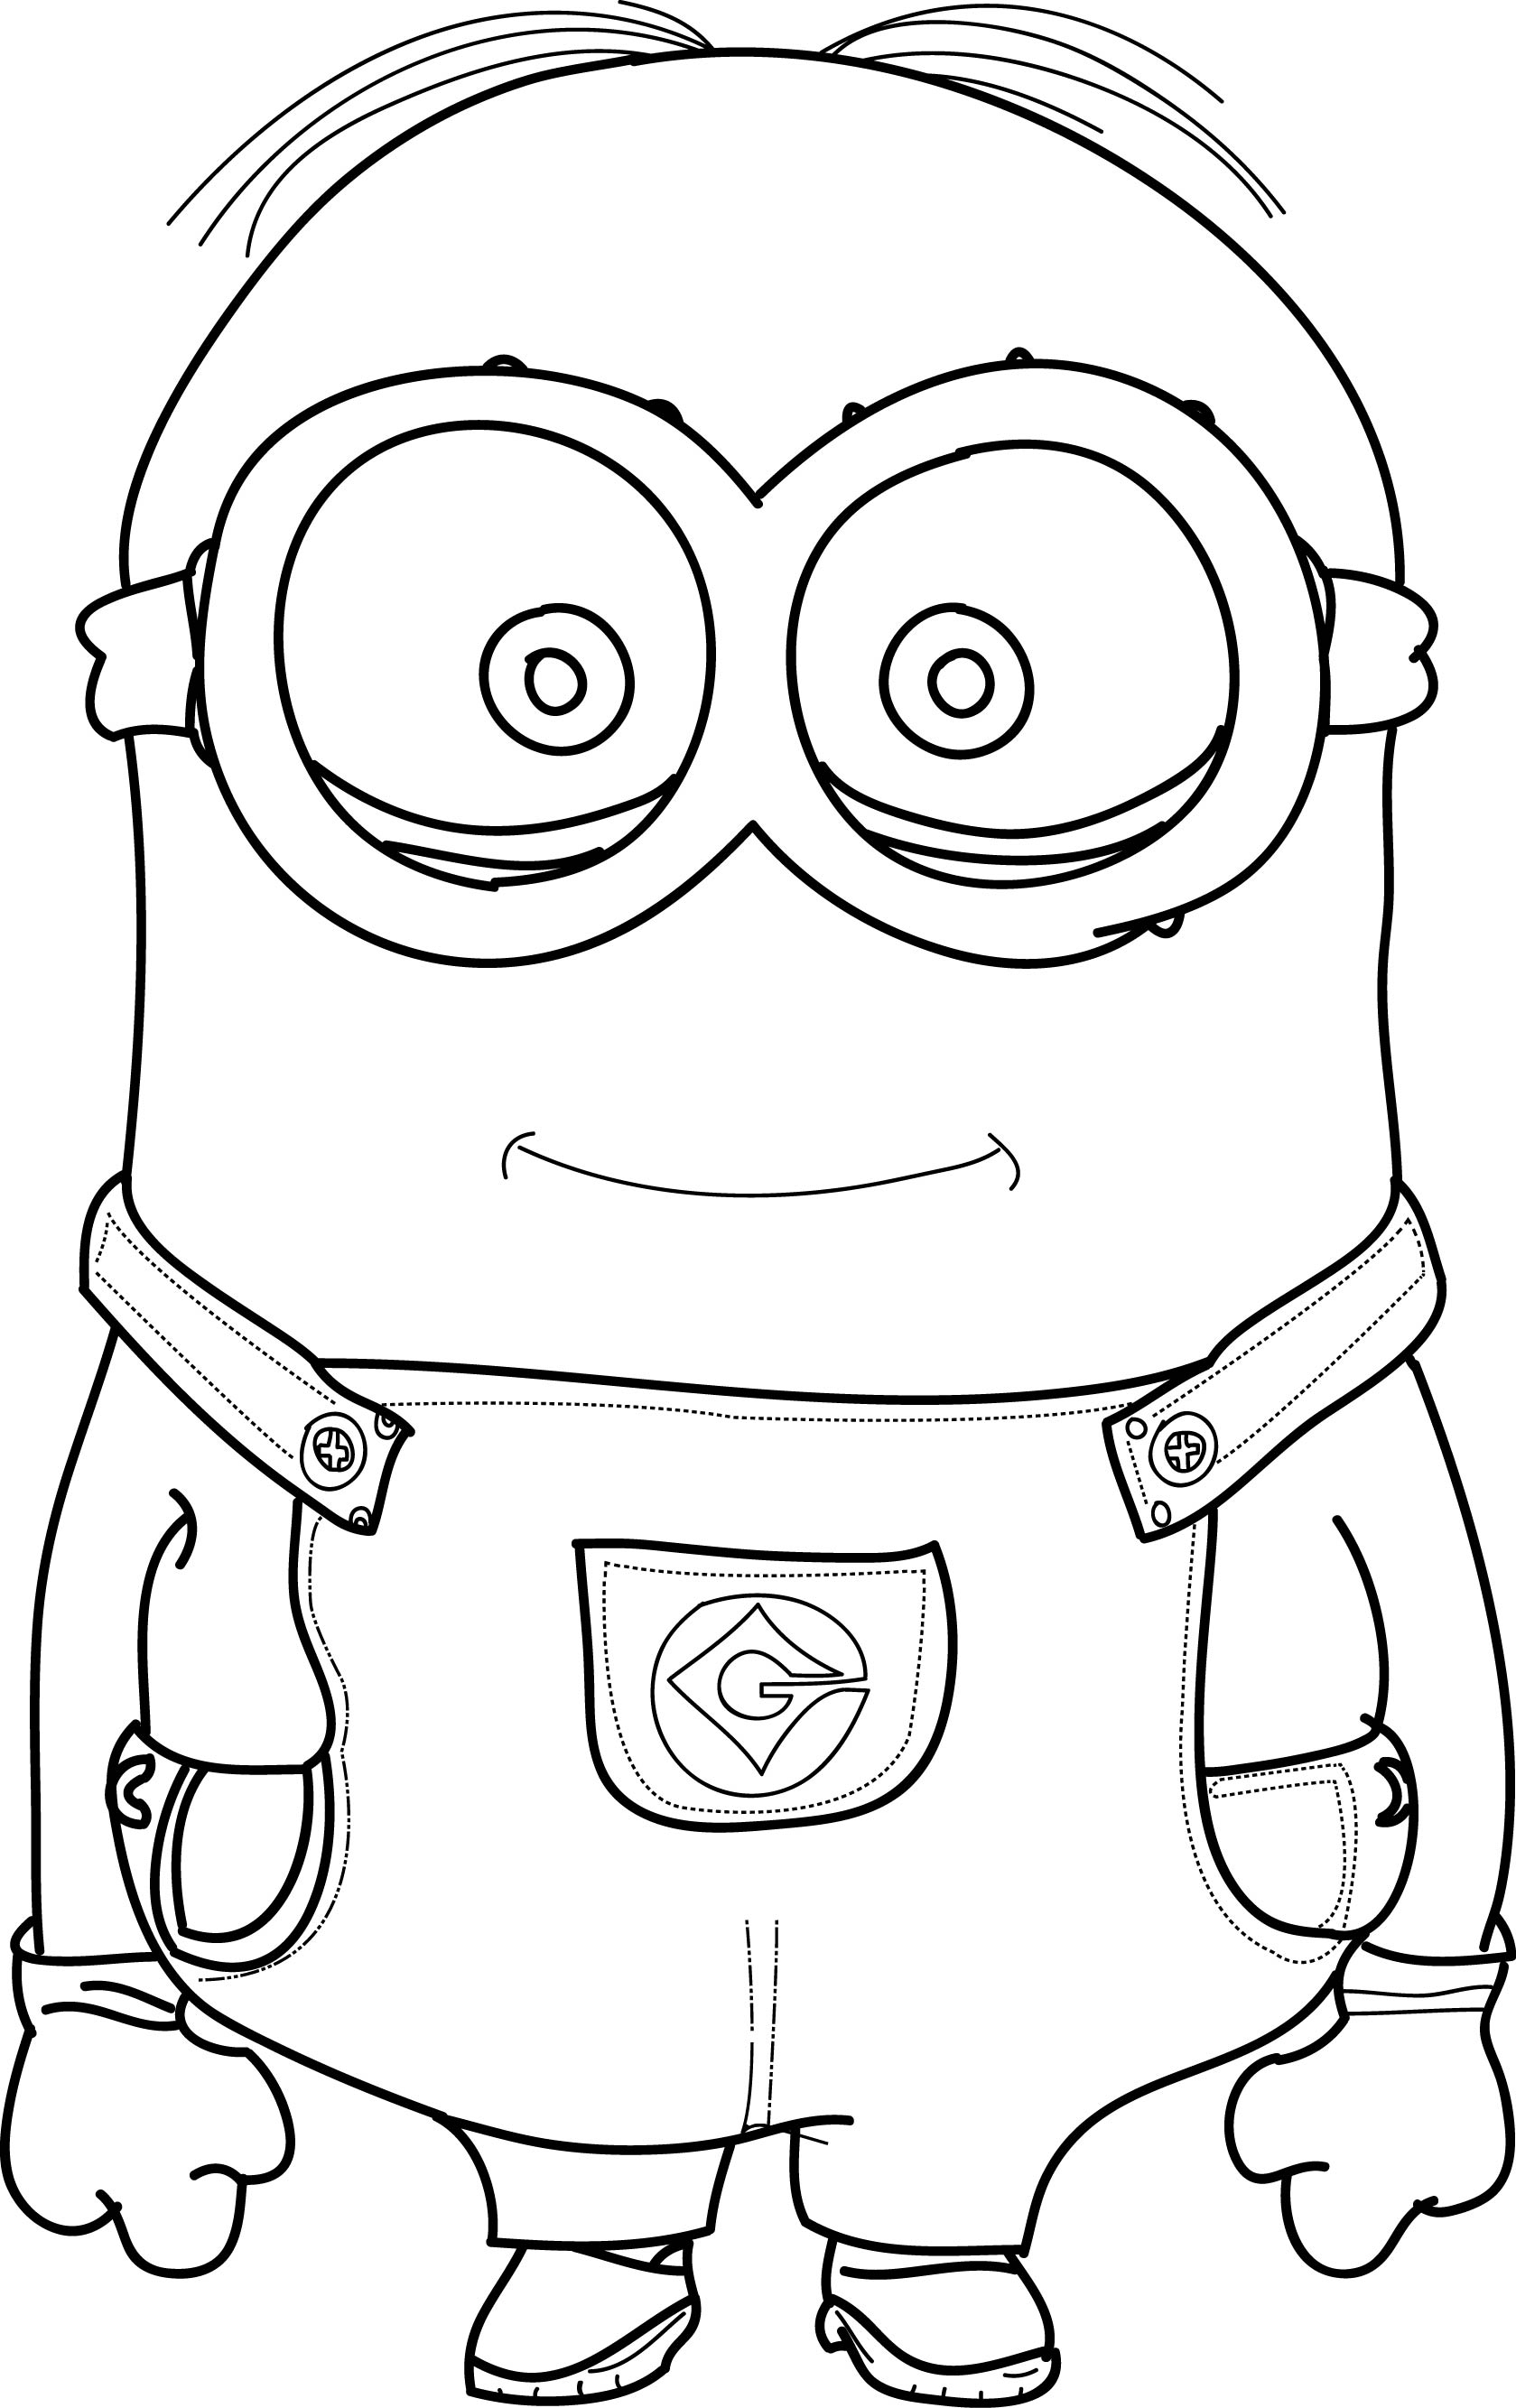 Minion Coloring Pages Kevin At Getcolorings.com | Free Printable